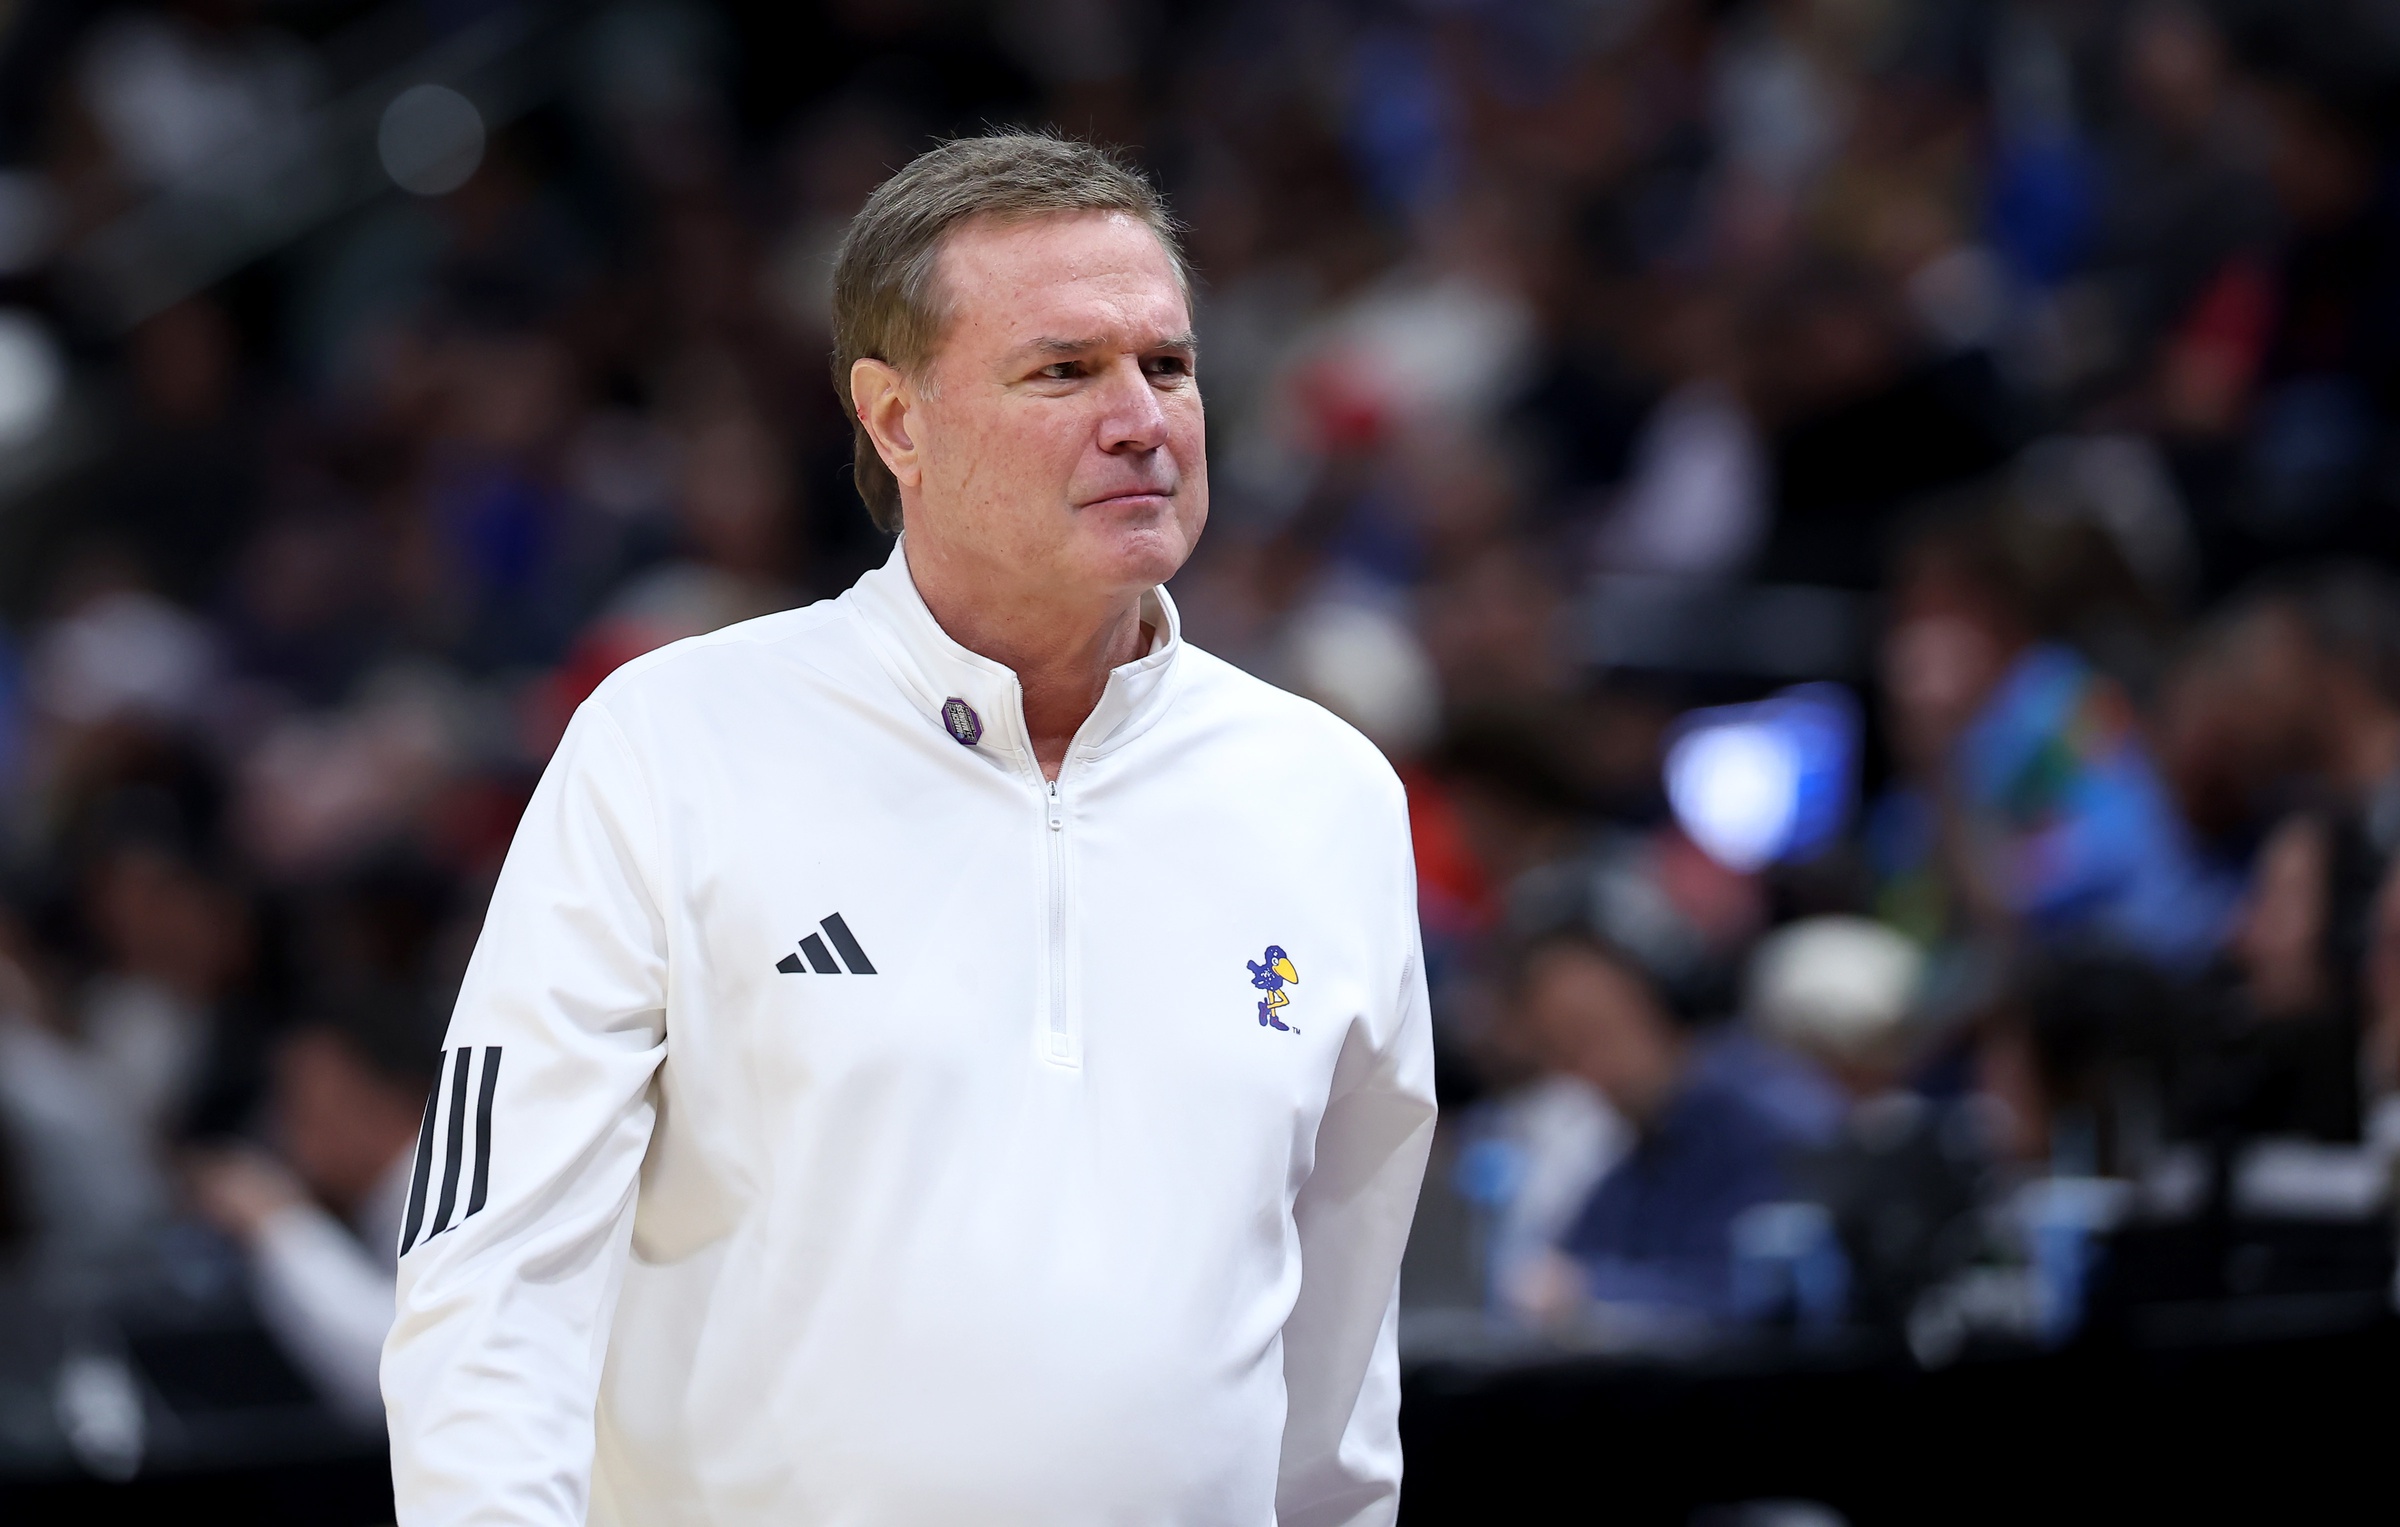 Bill Self is one of the top coaches in the Big 12.